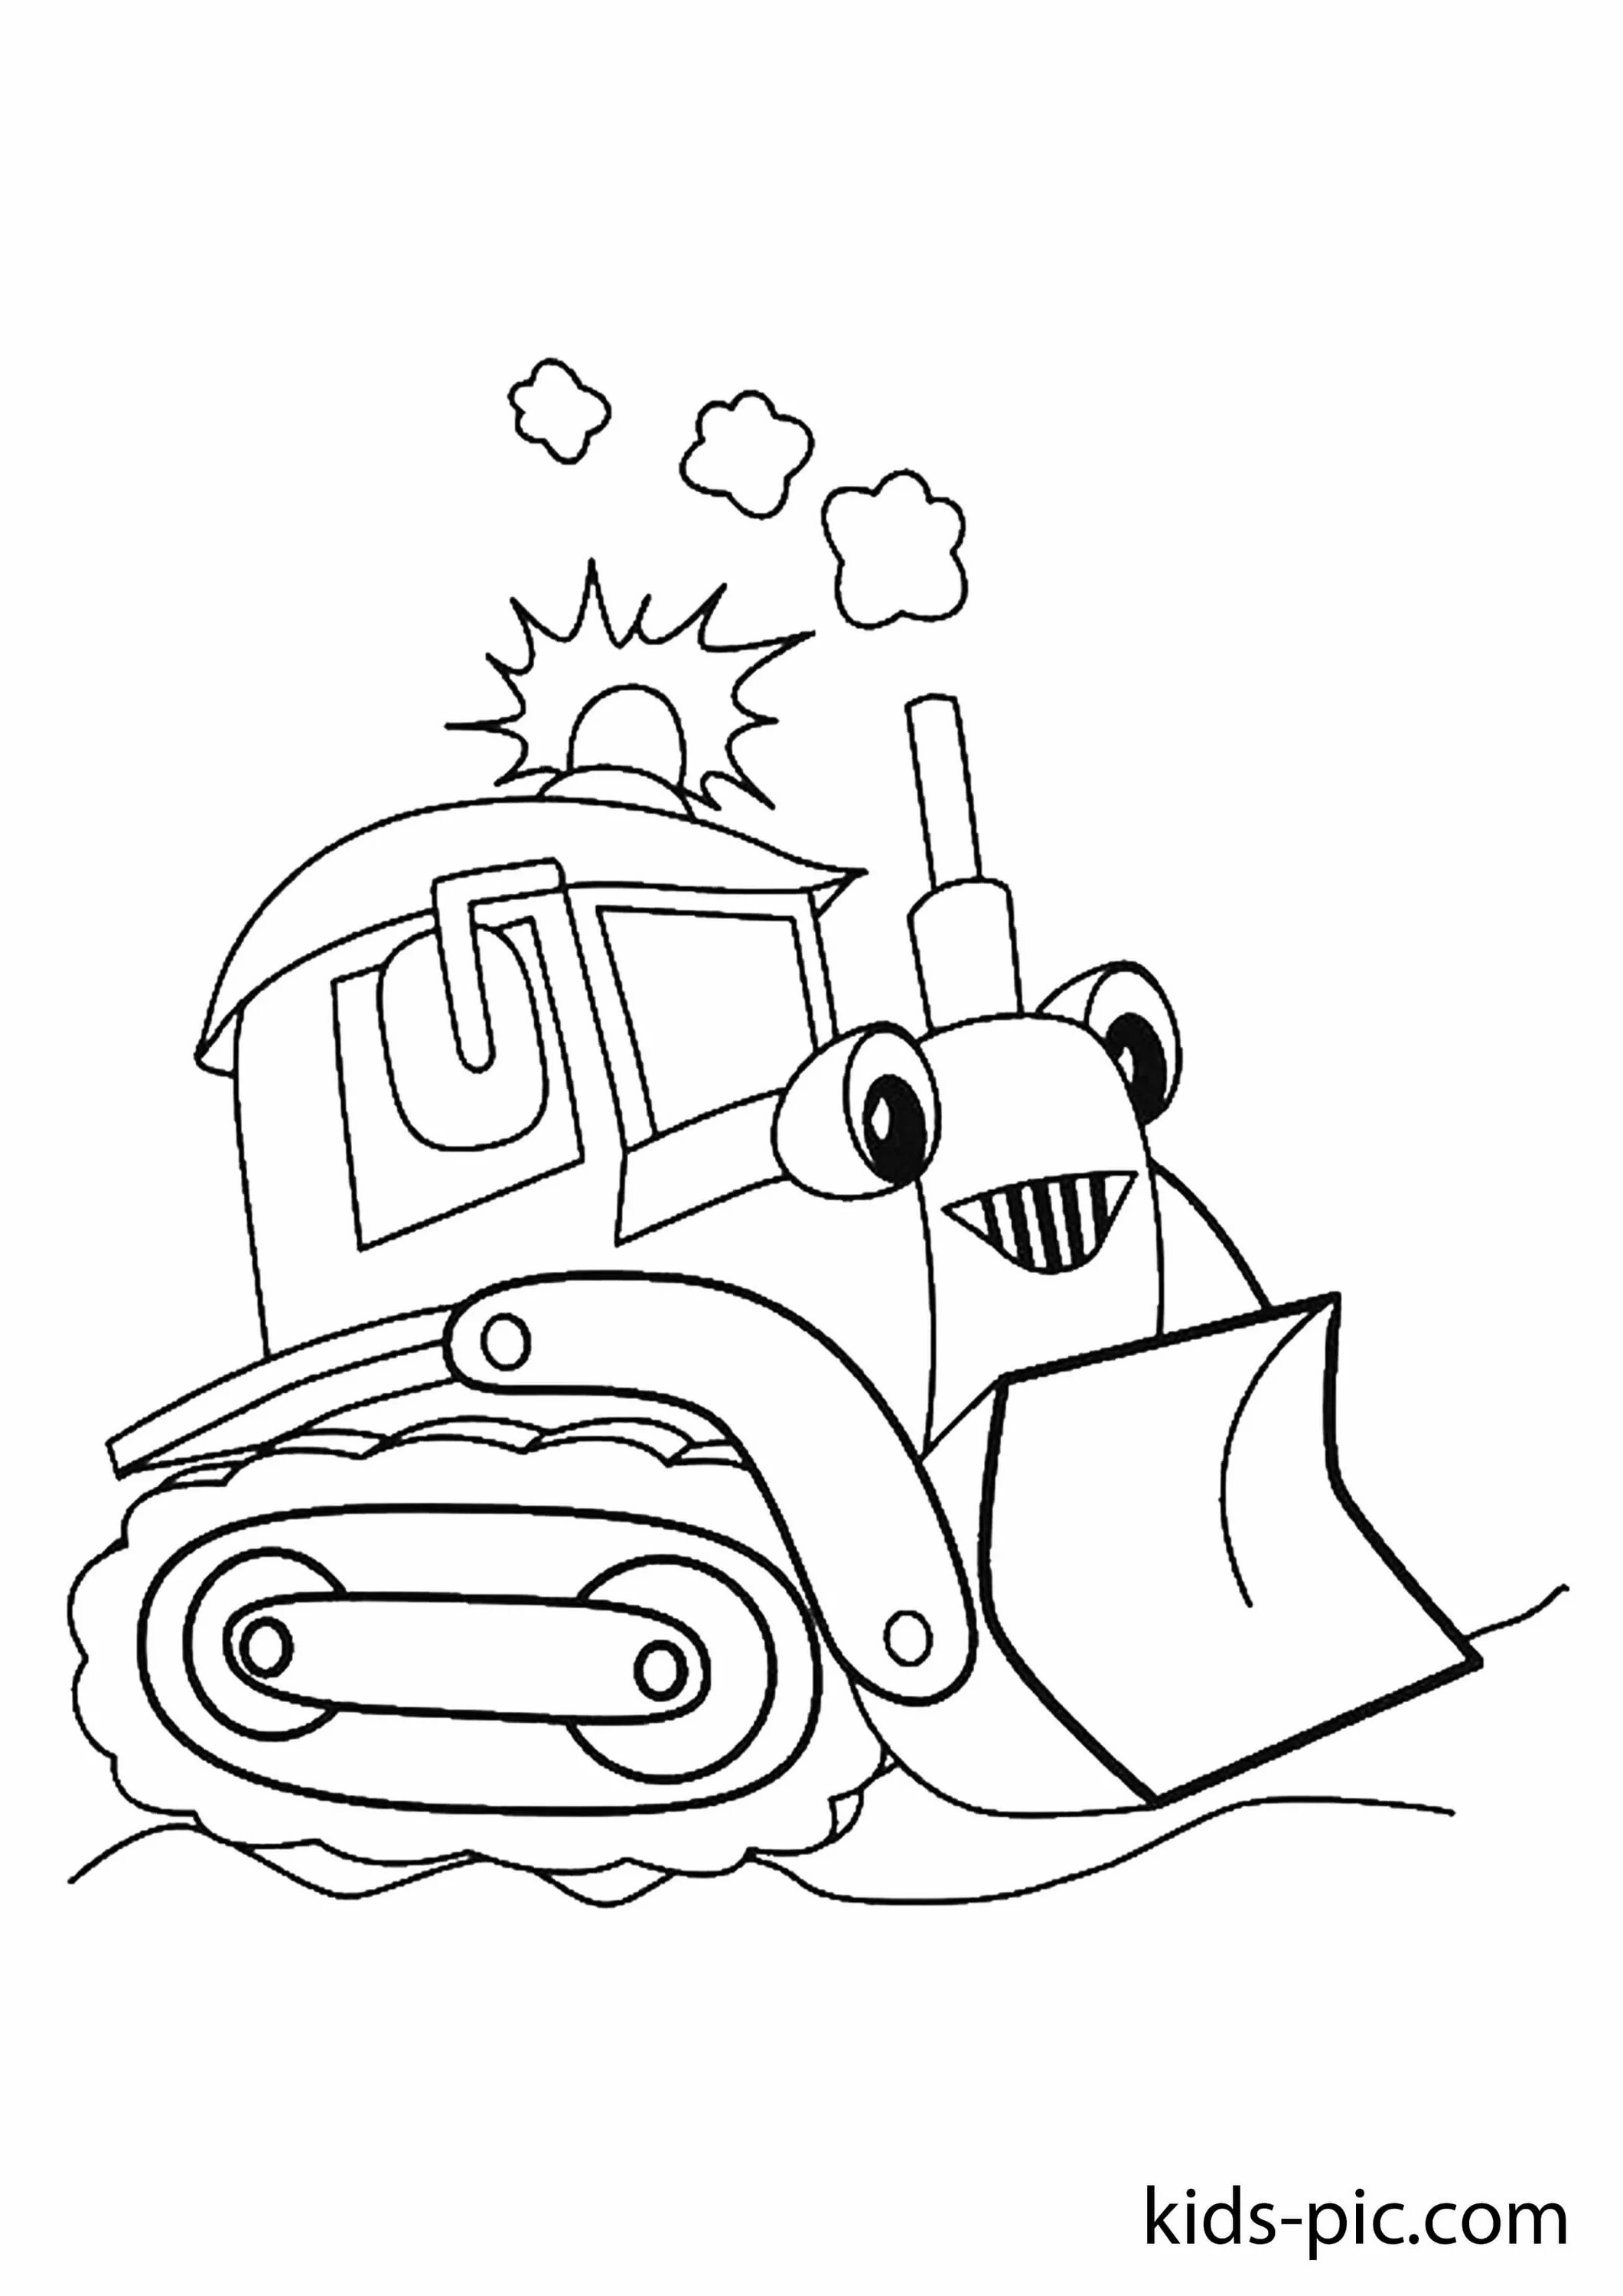 Snowblower inspirational coloring book for kids